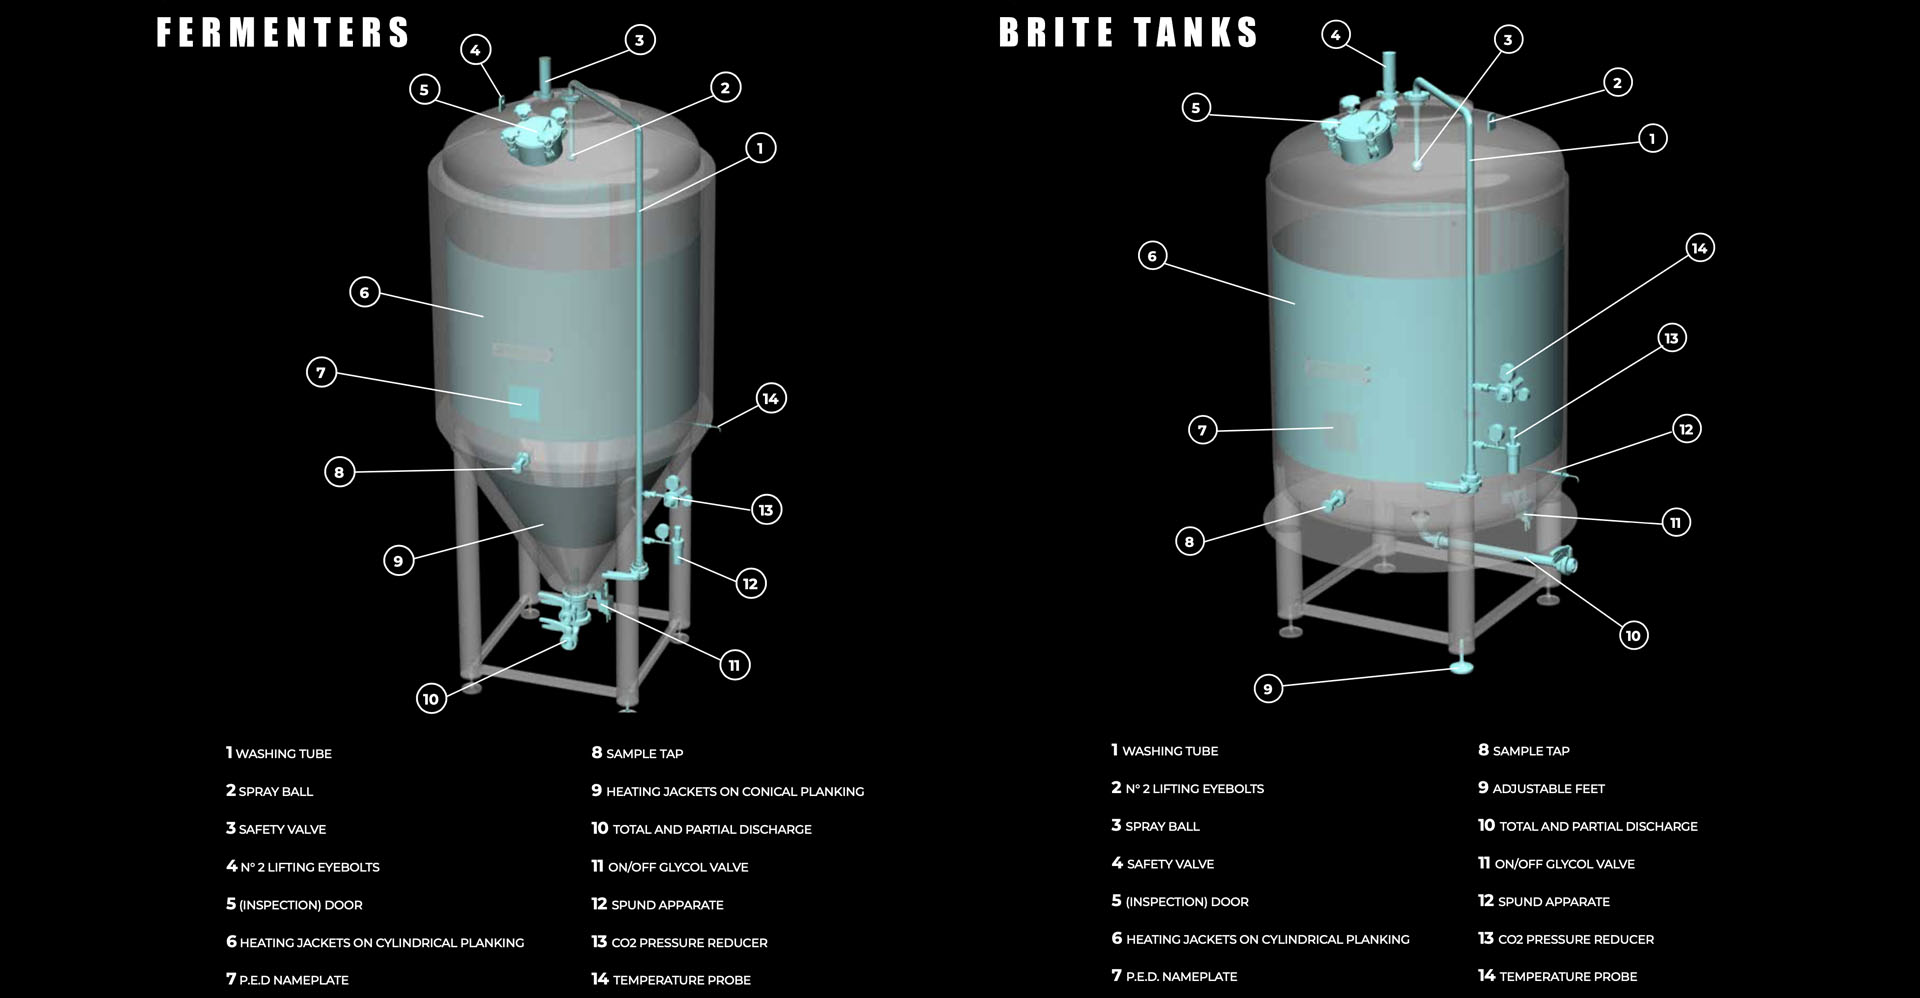 Simatec Brite Tanks and Fermenters from Craft Brewing Solutions